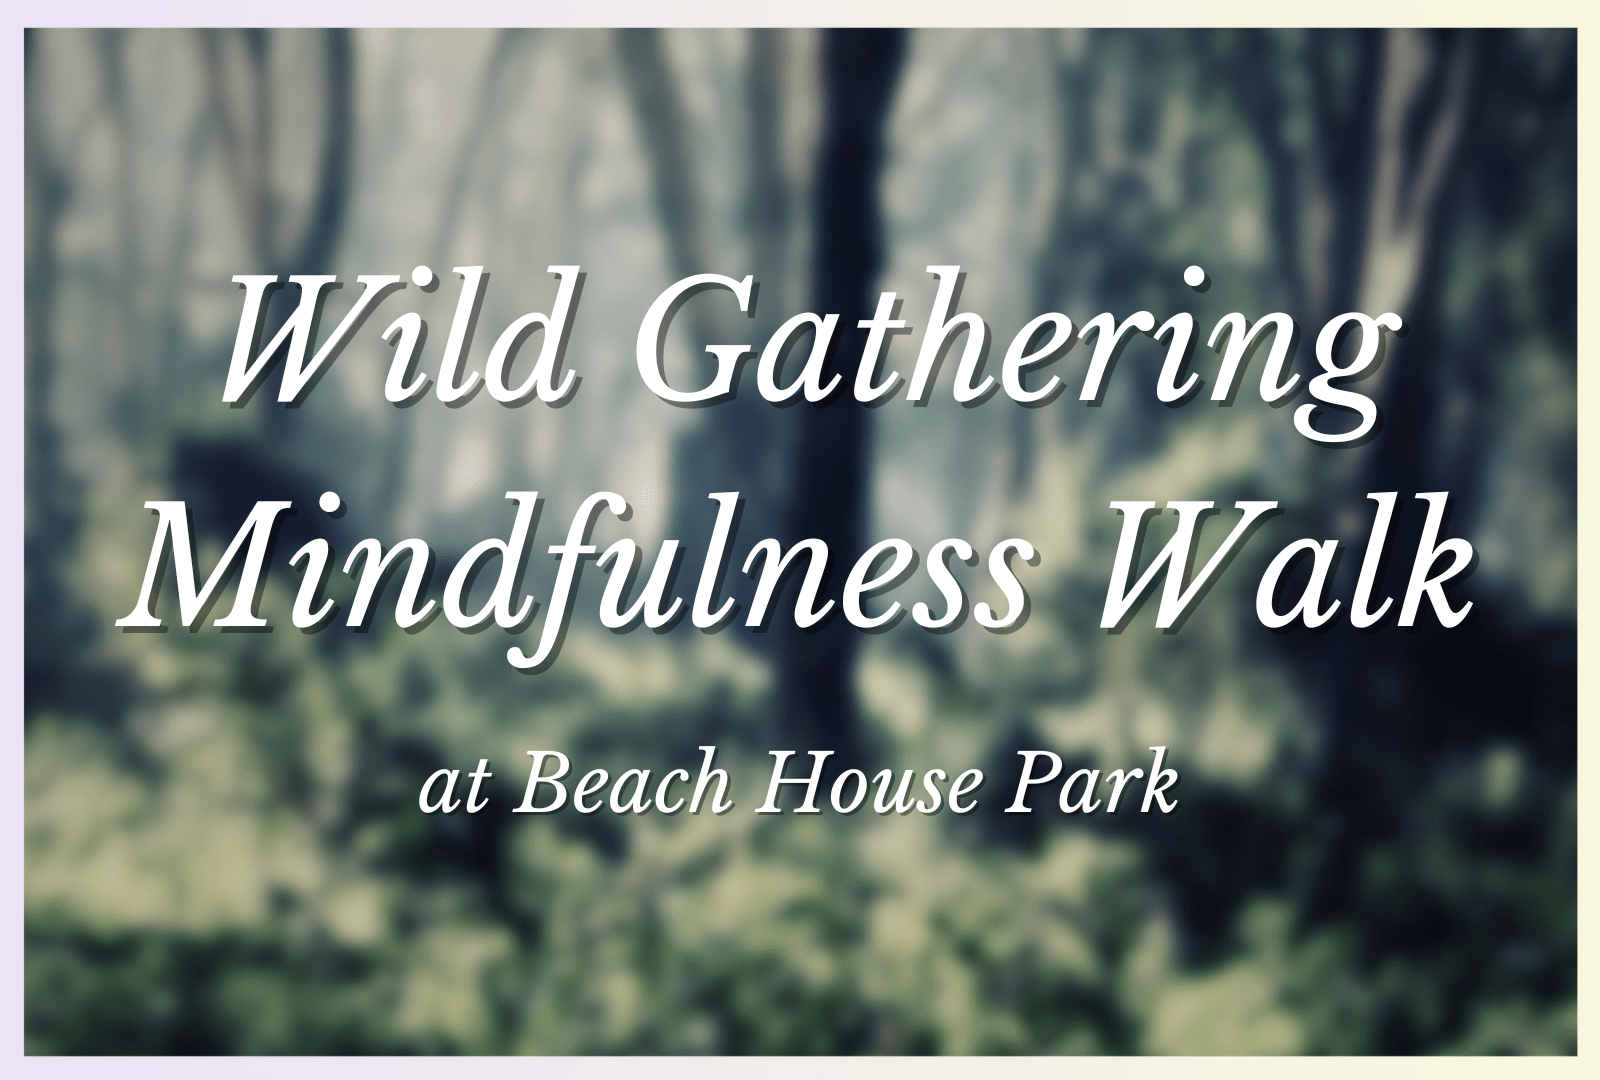 A Forest background with the words 'Wild Gathering Mindfulness Walk' overlaid